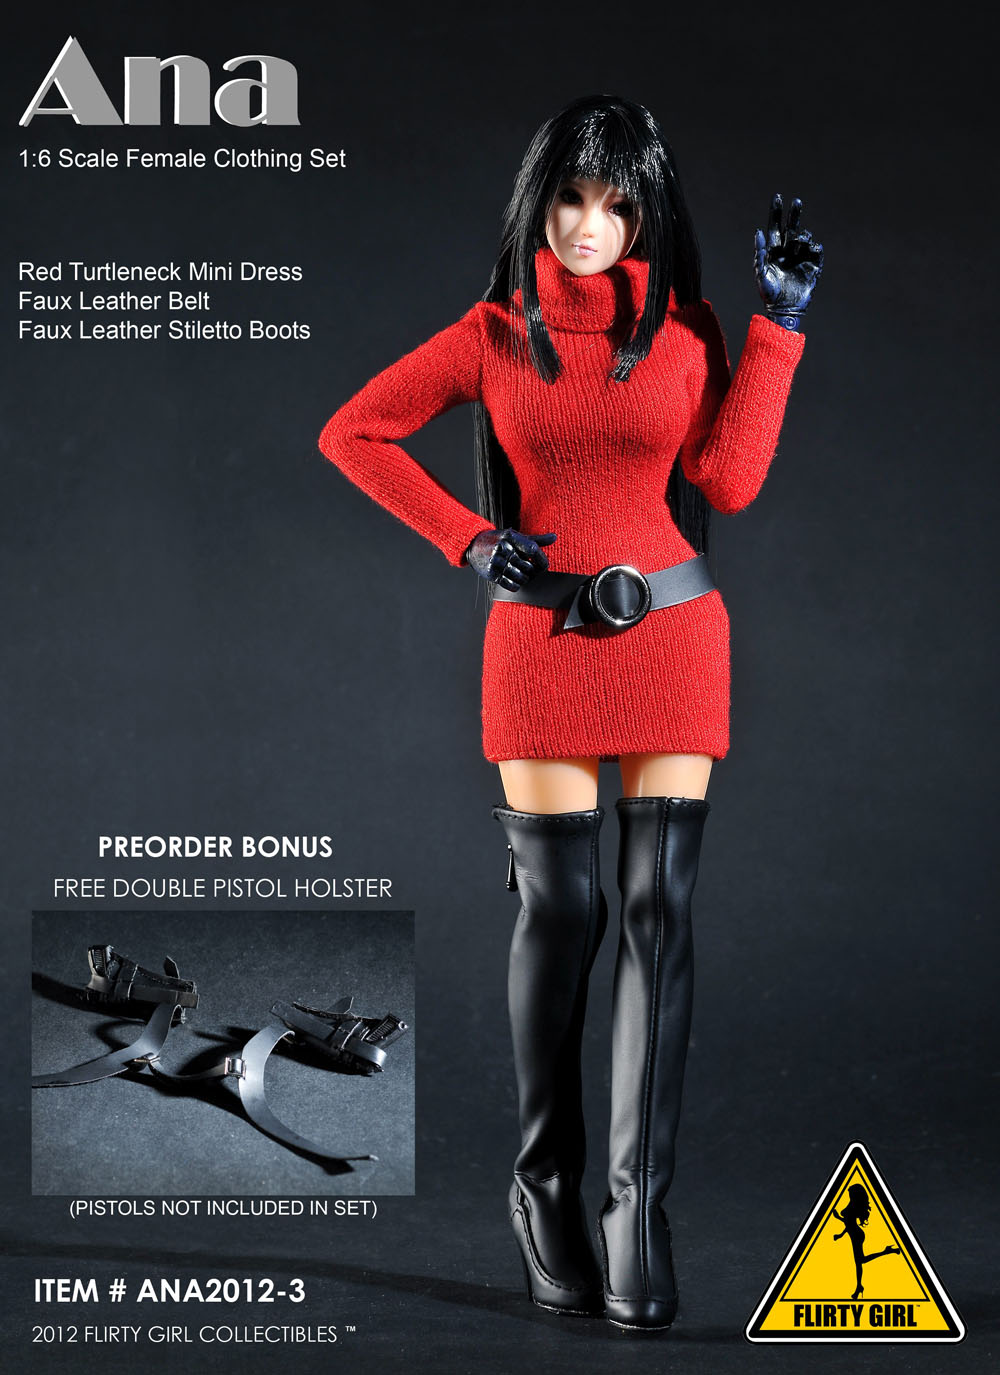 Incoming: Flirty Girl Collectibles 1/6th scale ANA Female Clothing Set.